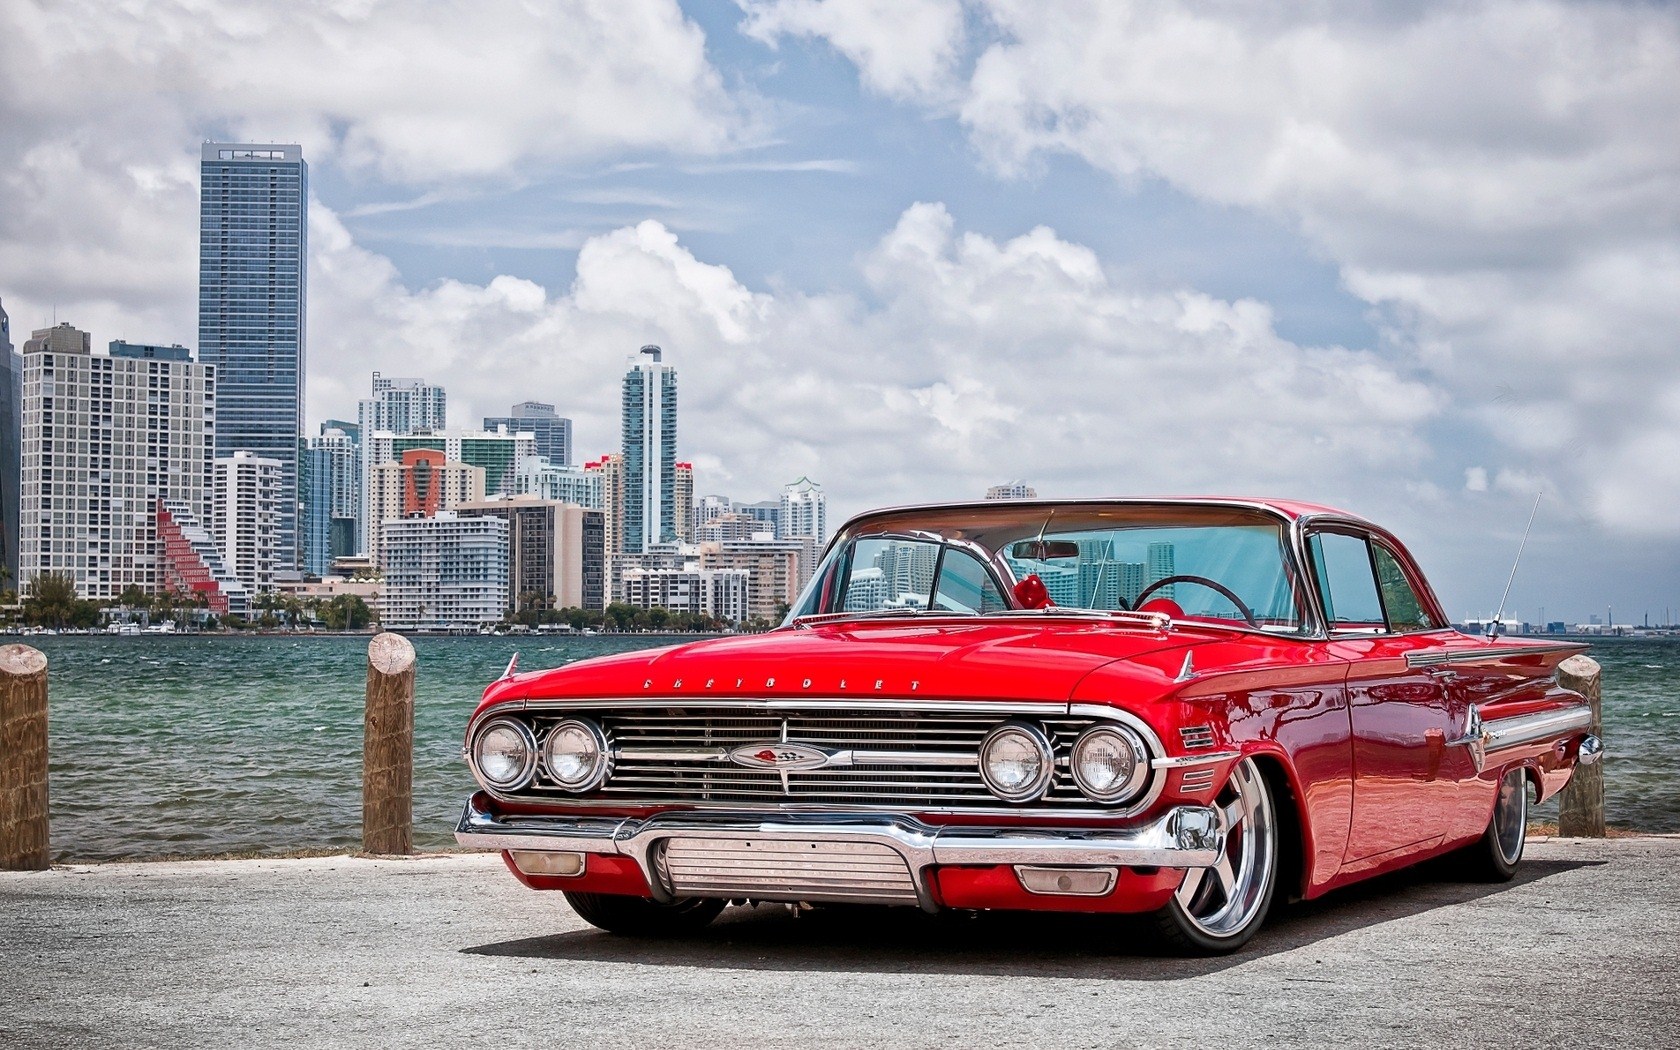 1960 Chevy Impala Old Chevrolet HD Wallpaper is a awesome hd photography. Free to upload, share the high definition photos. 1960 Chevy Impala Old Chevrolet ...